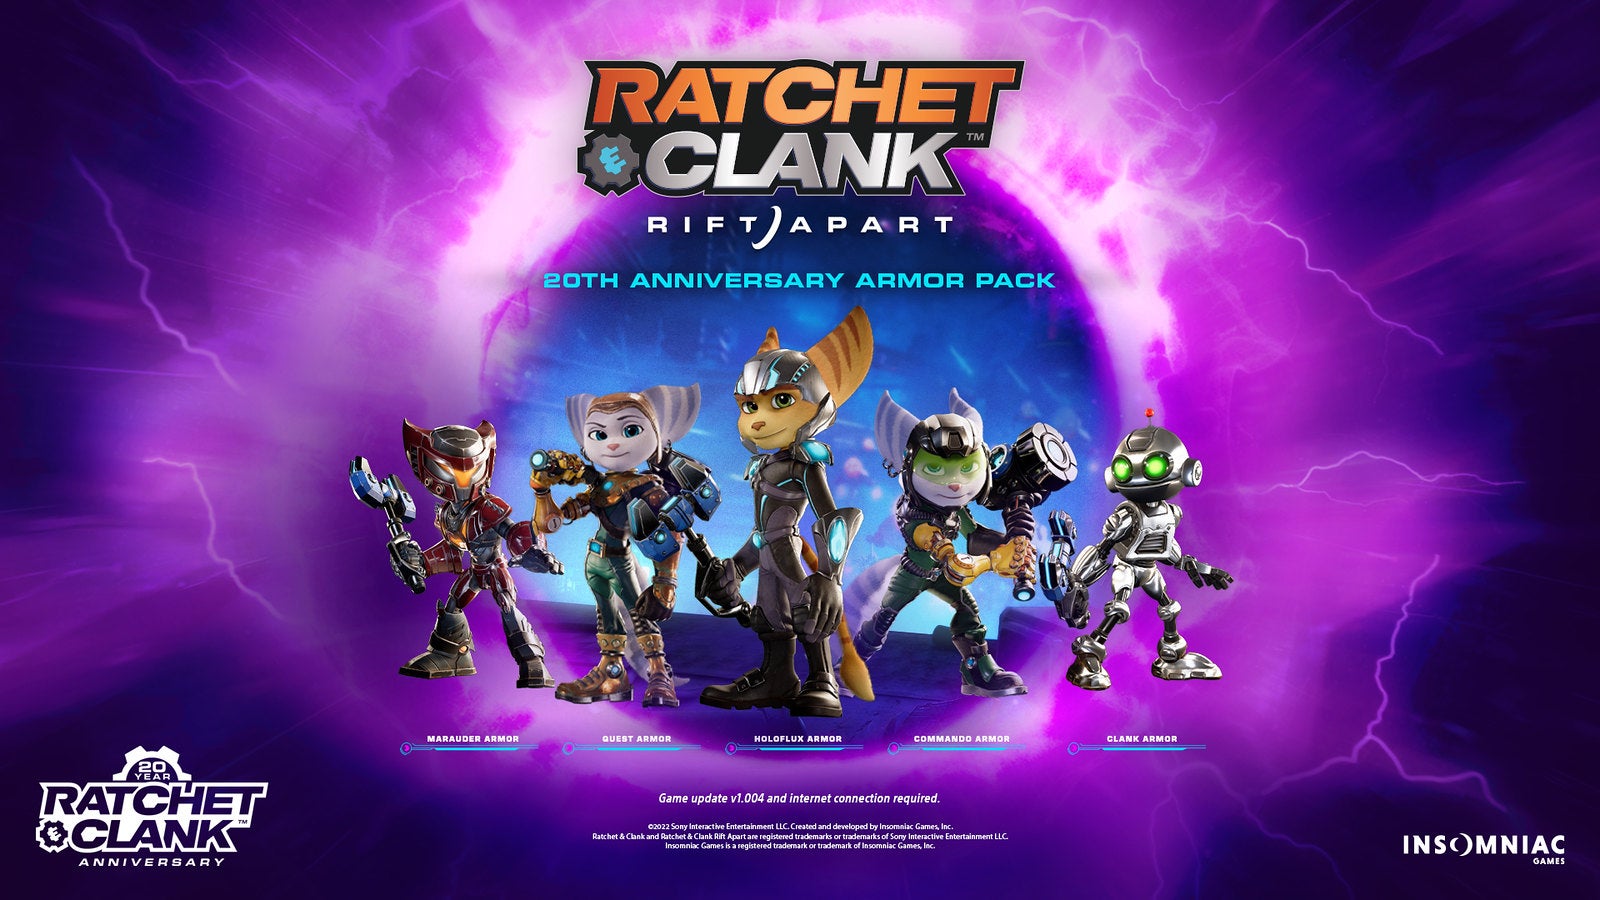 Five Ratchet & Clank Games are Joining PlayStation Plus Premium This Month